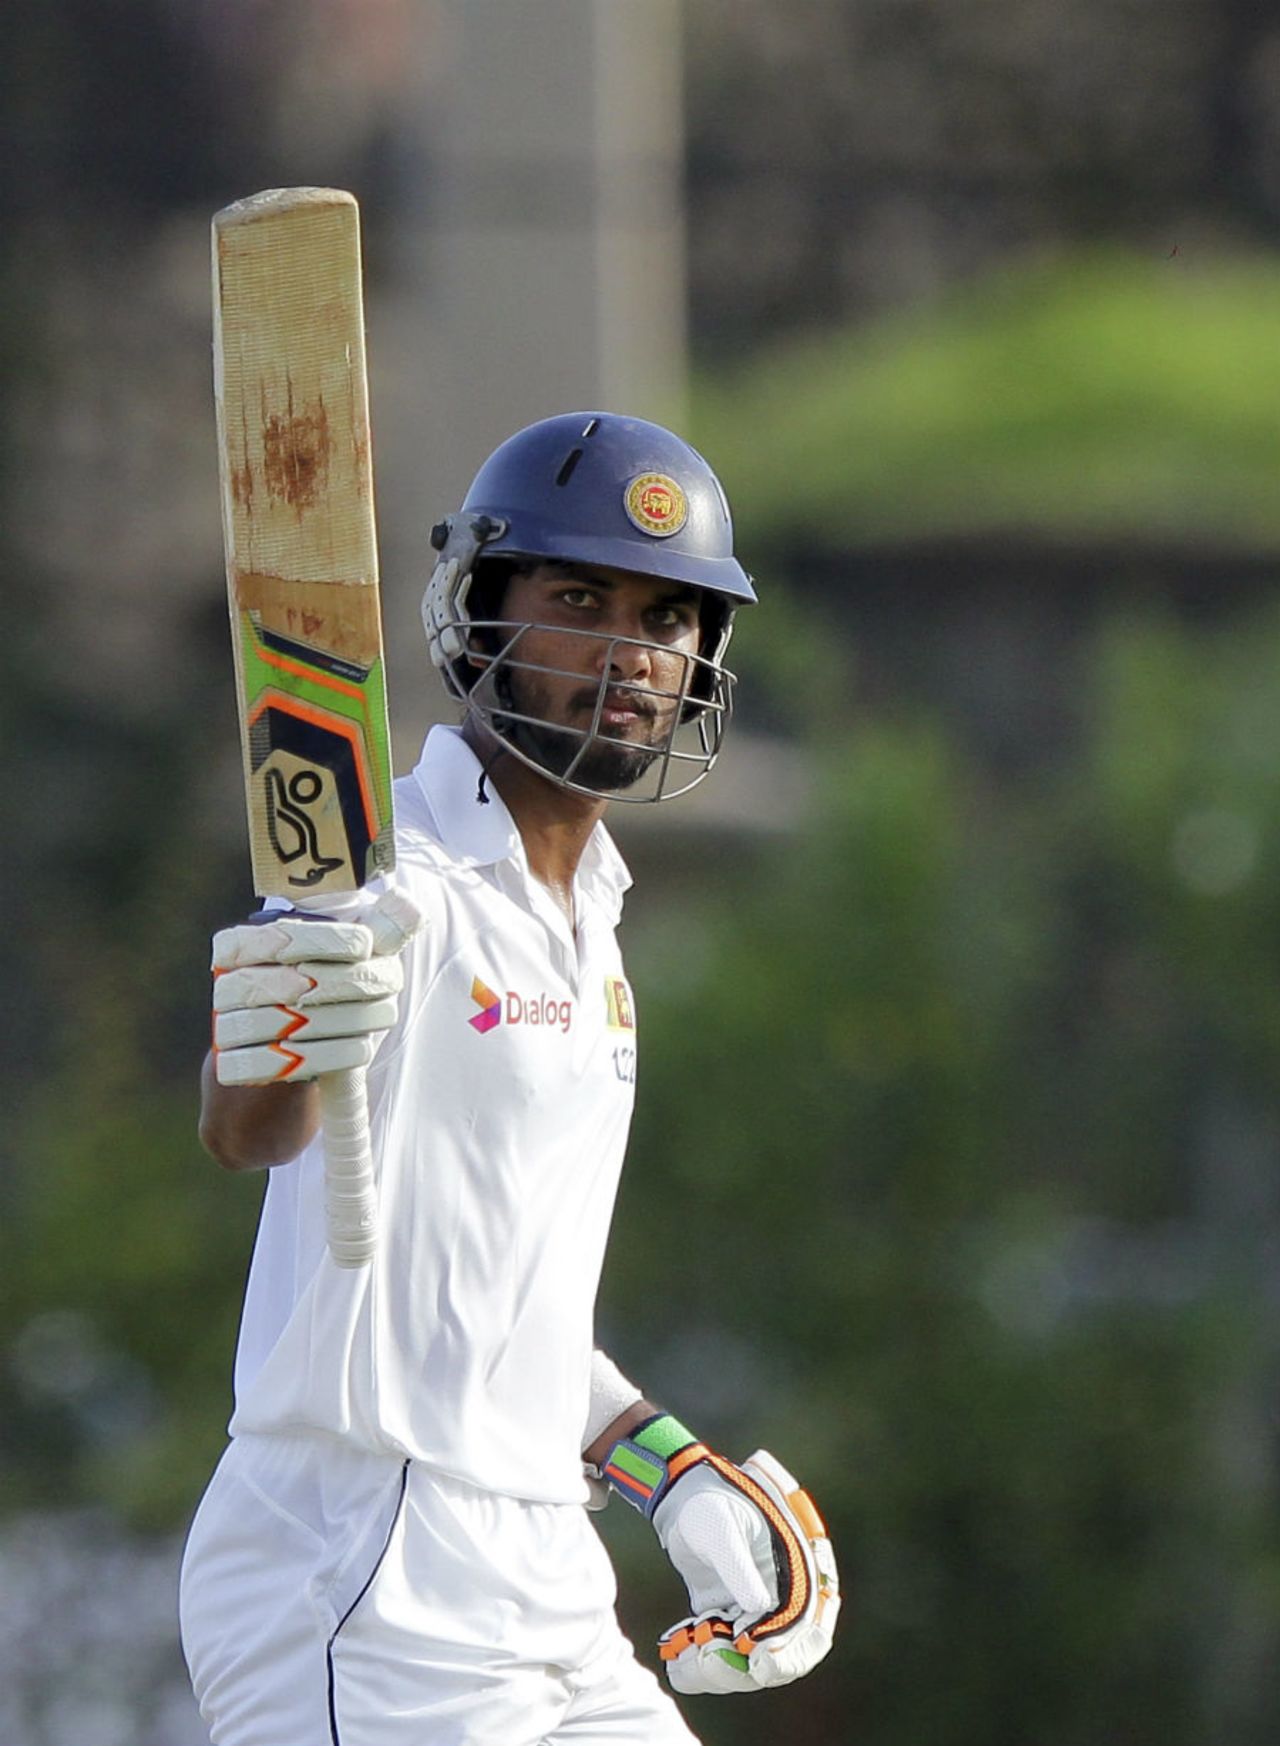 Dinesh Chandimal acknowledges the crowd after his fifty, Sri Lanka v West Indies, 1st Test, Galle, 1st day, October 14, 2015